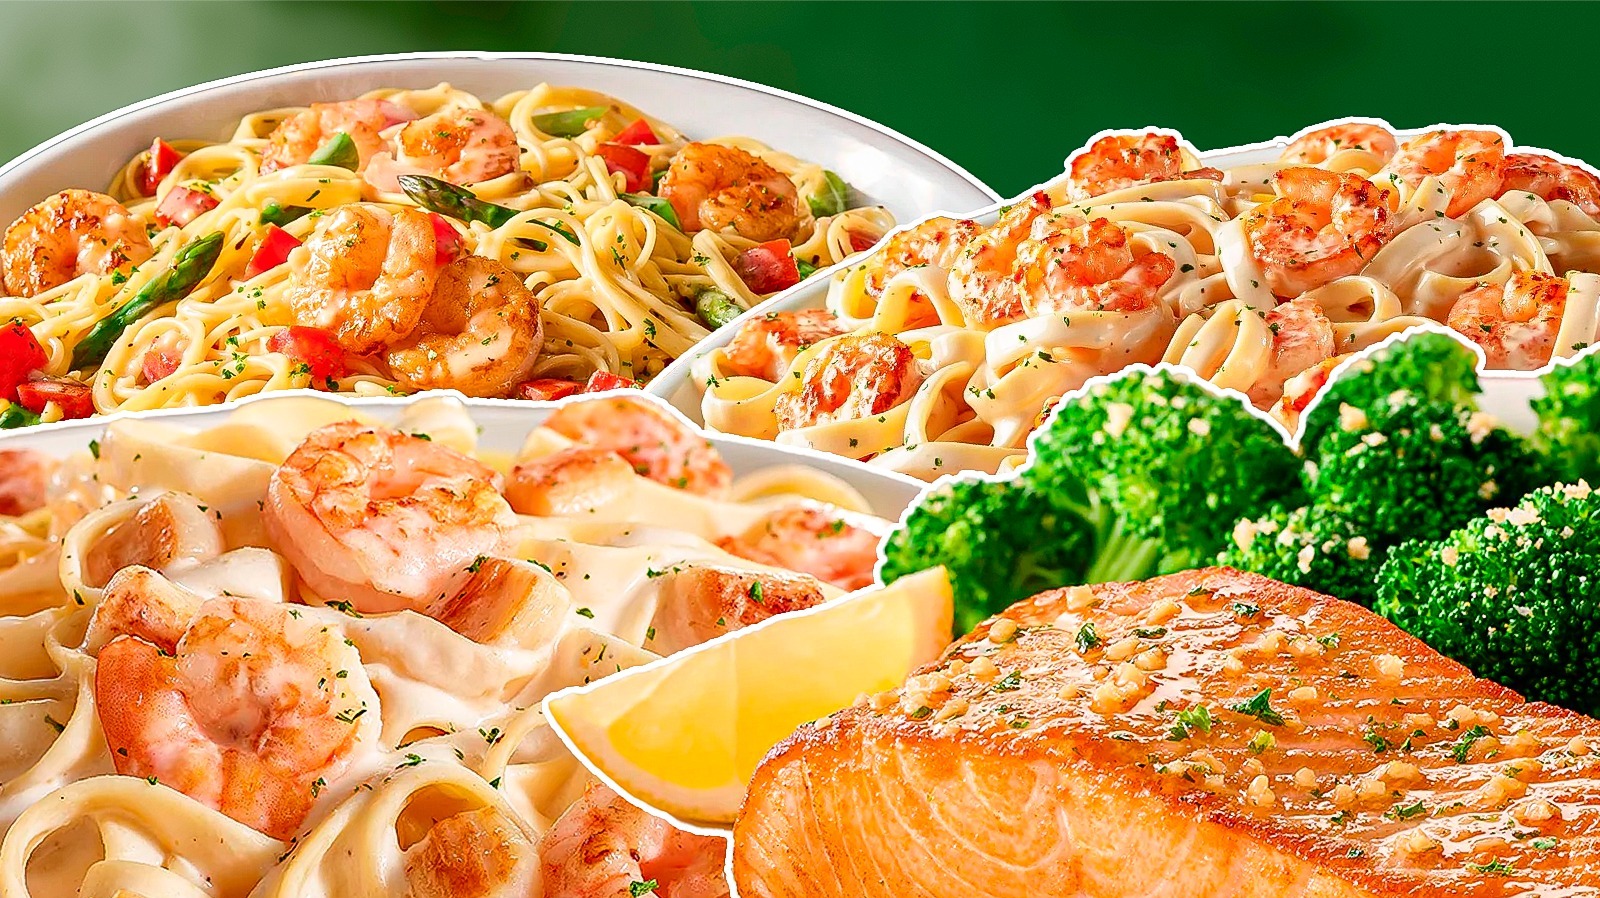 Every Seafood Dish At Olive Garden, Ranked